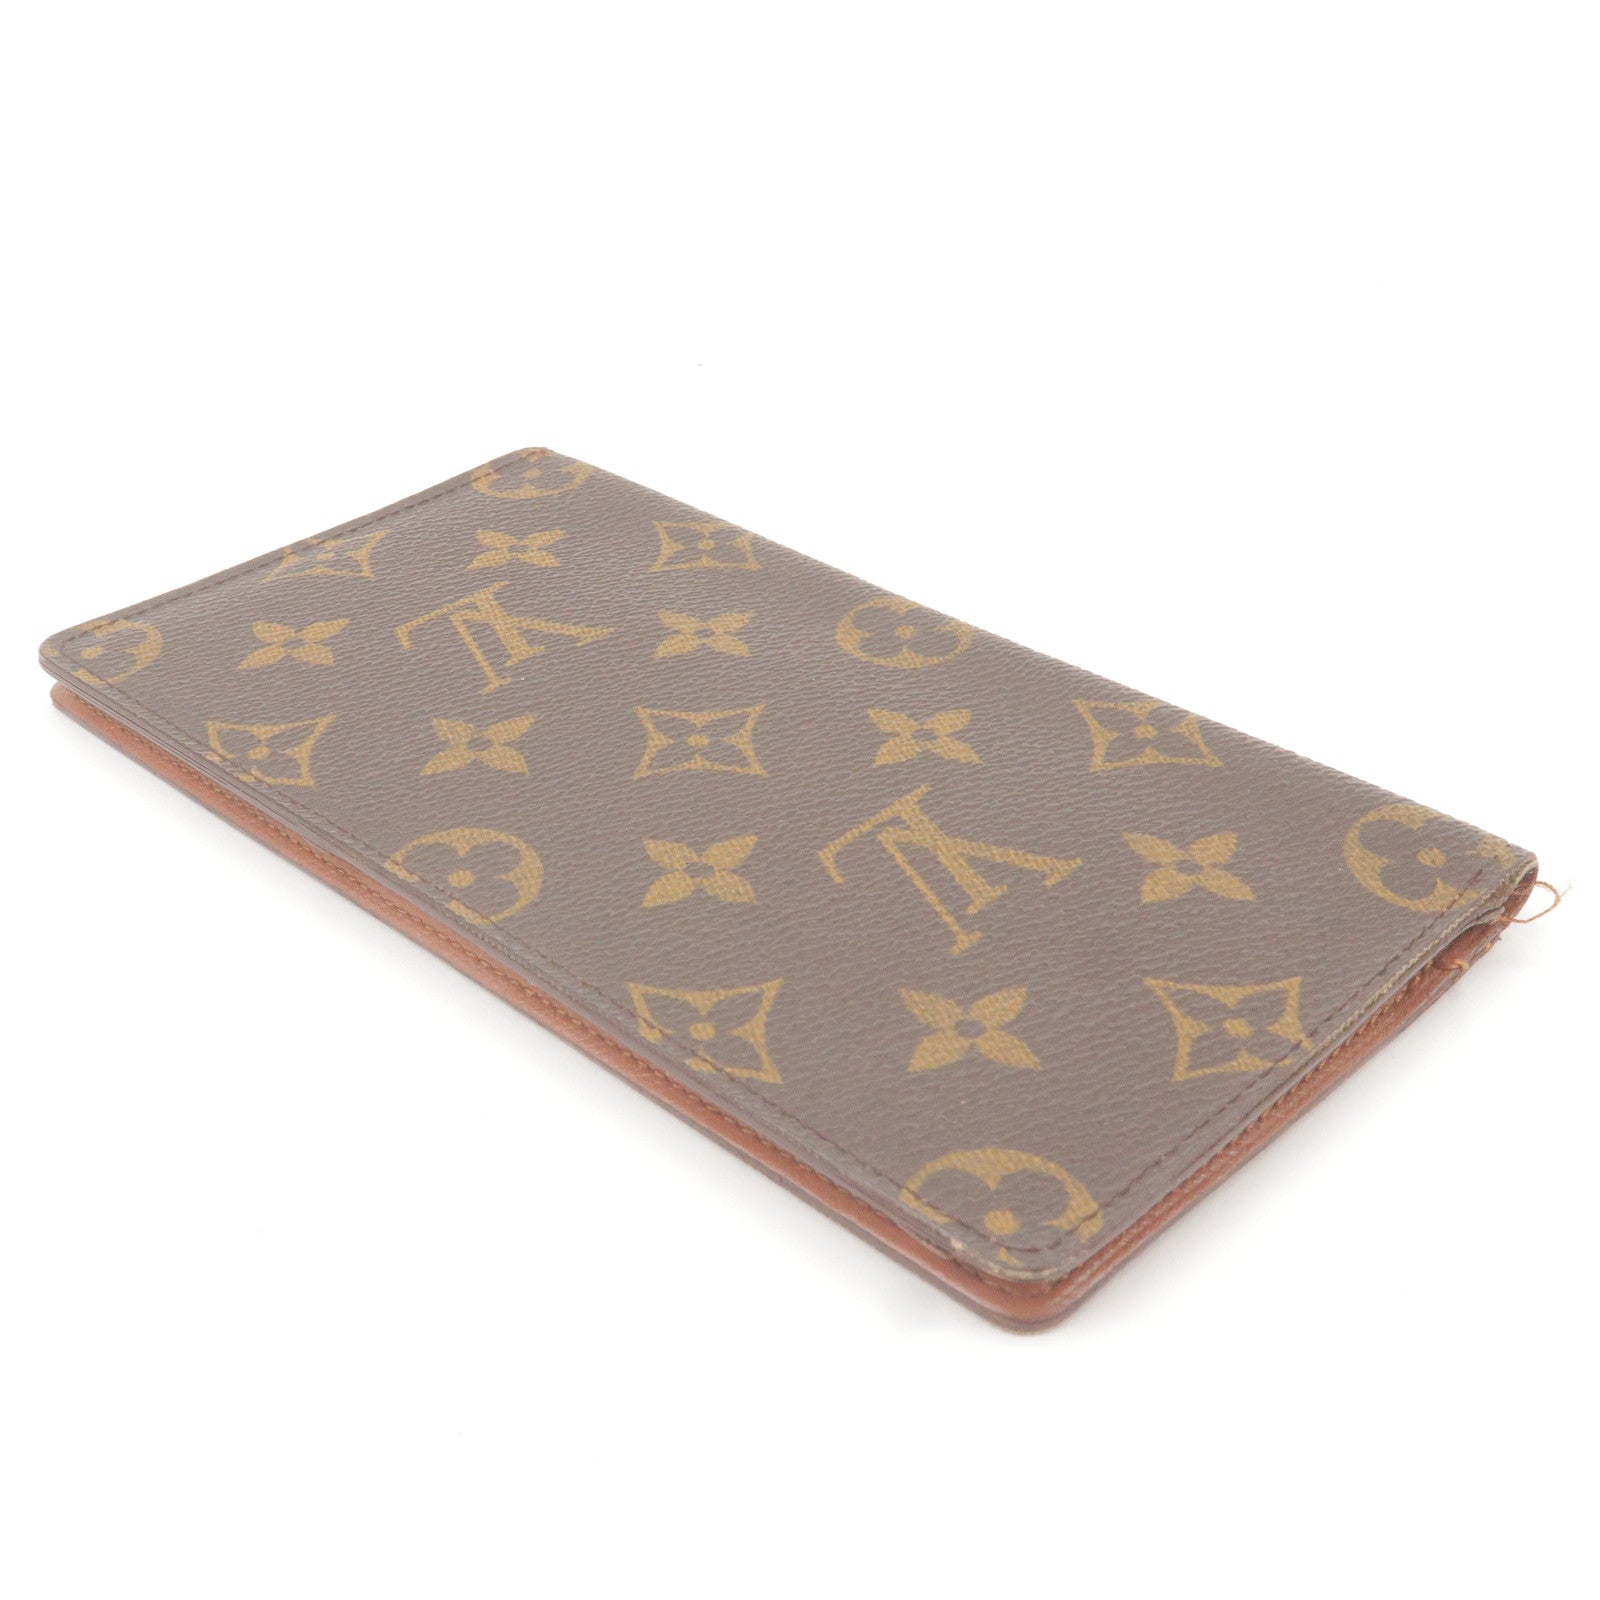 Newest wallet M60136 monogram two tone